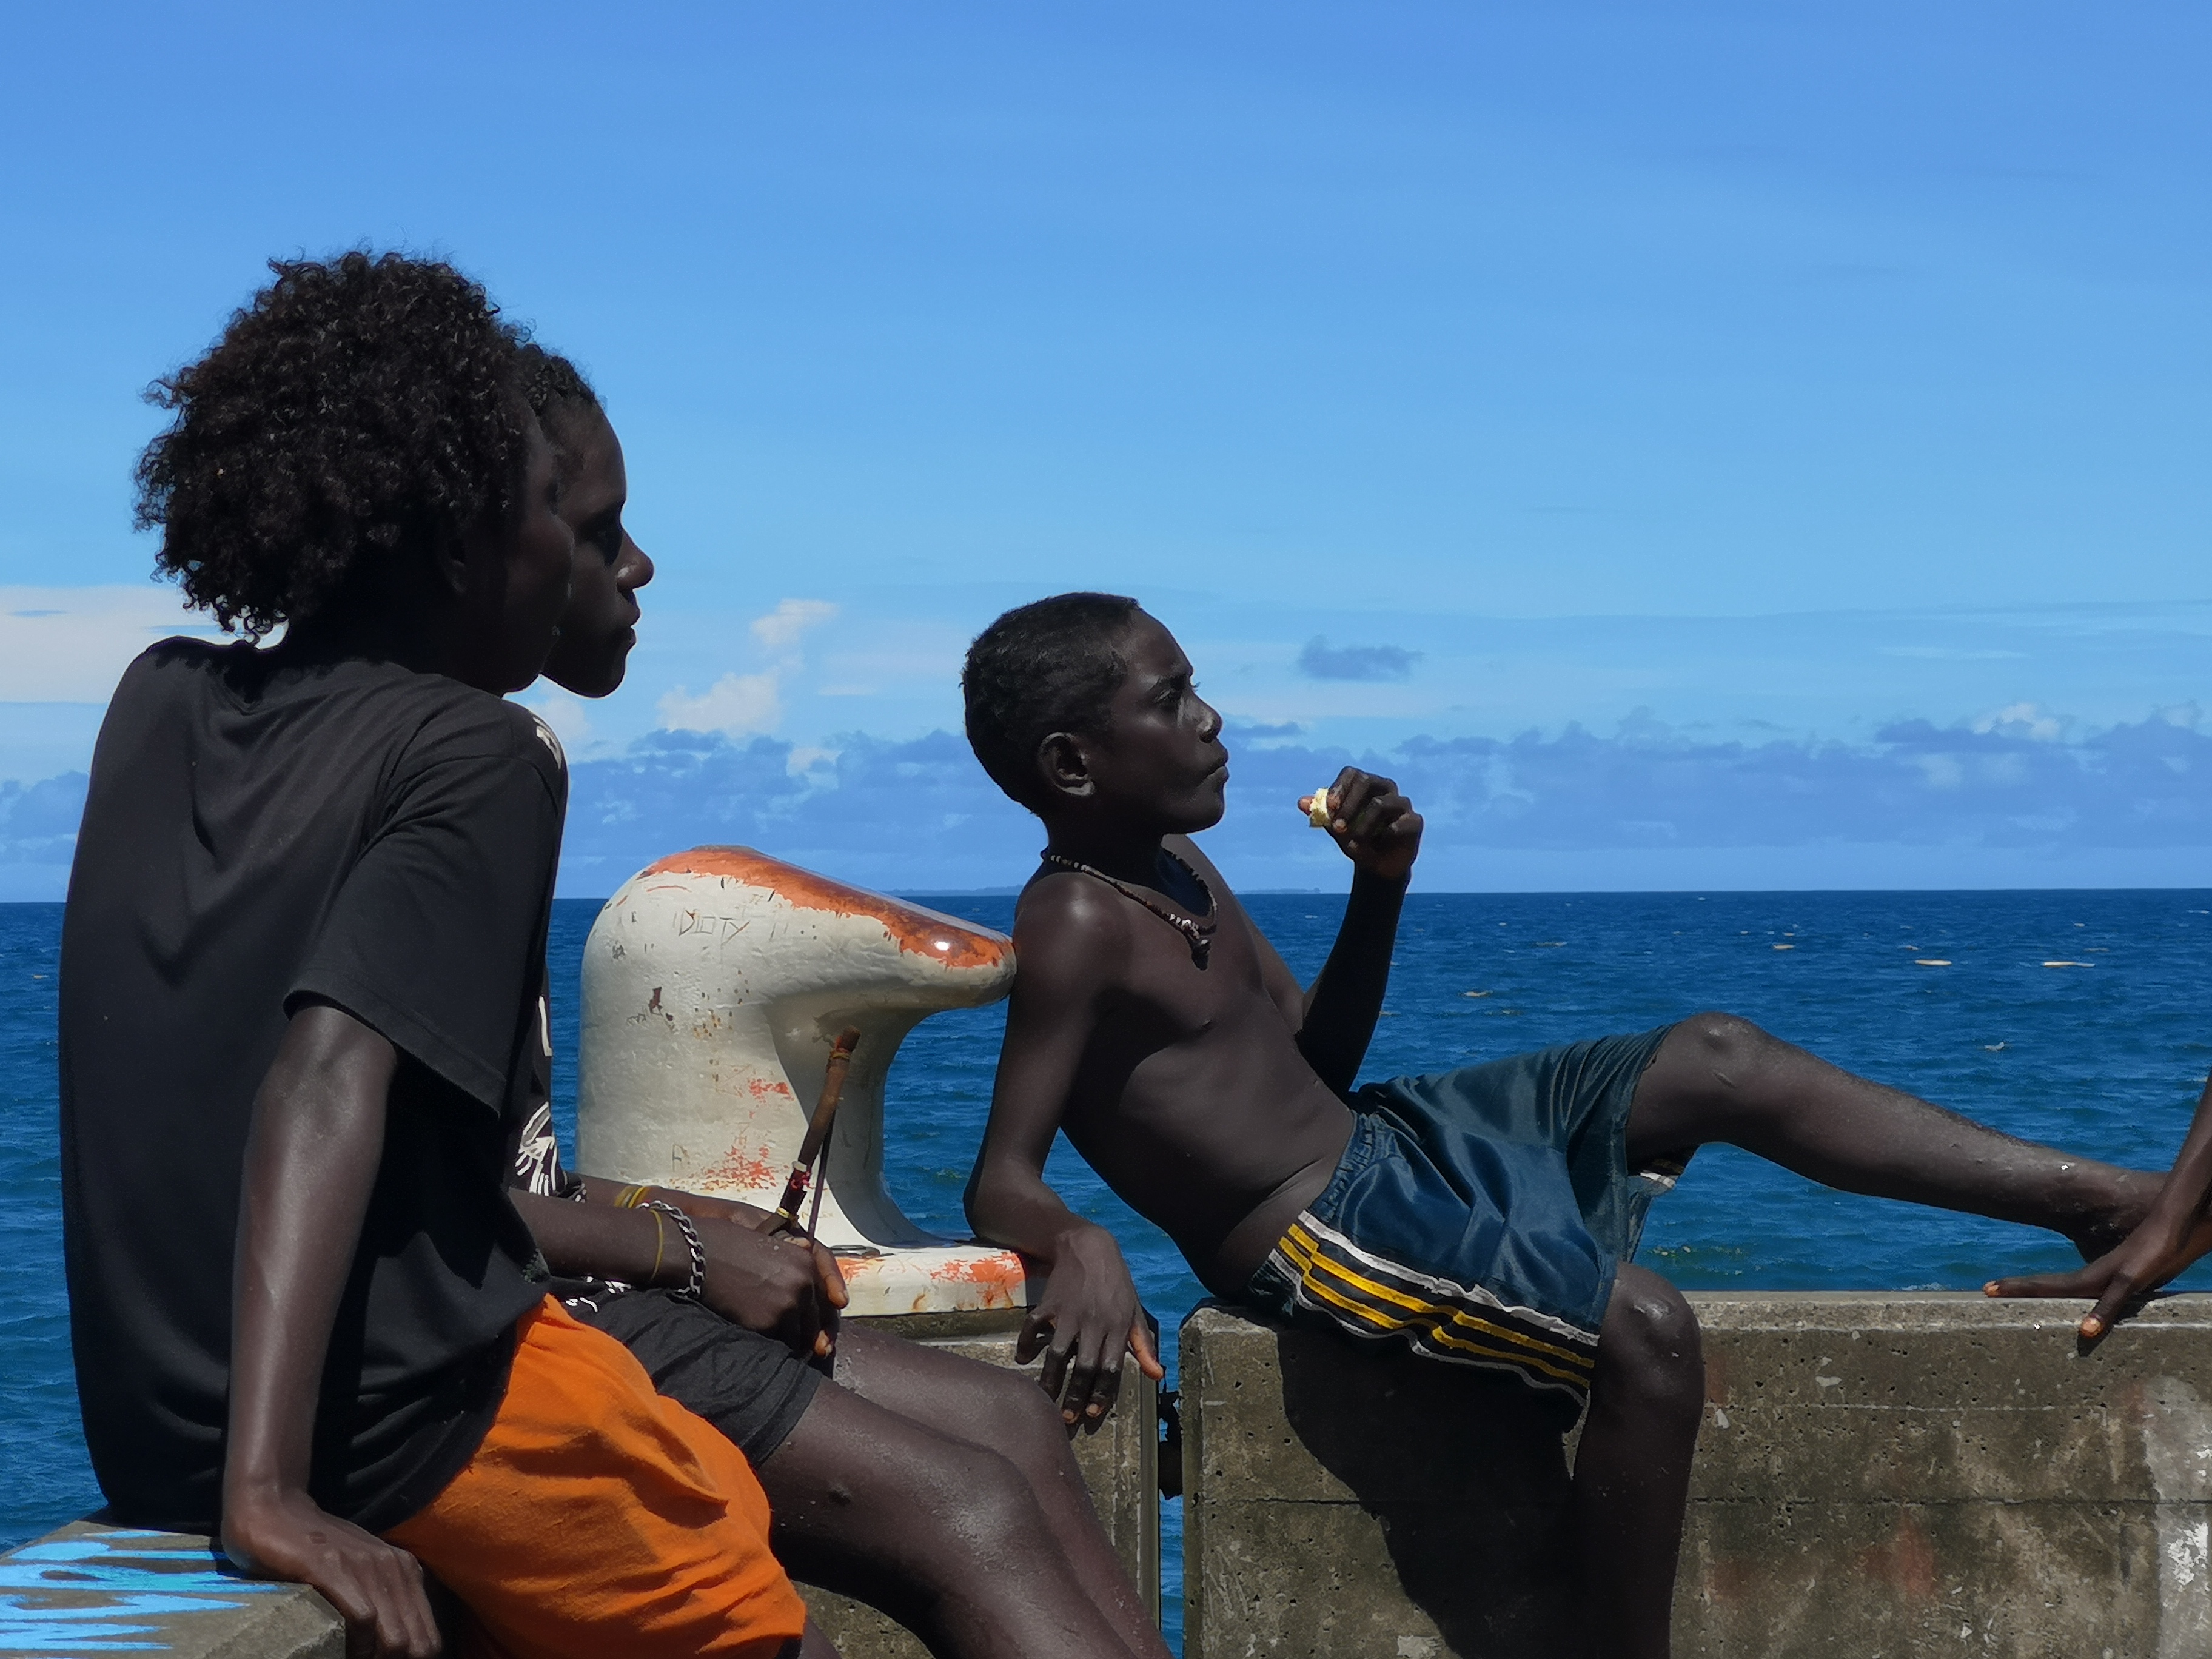 Youngsters are relaxing on the beach, a few kilometres away from the Solomon Islands